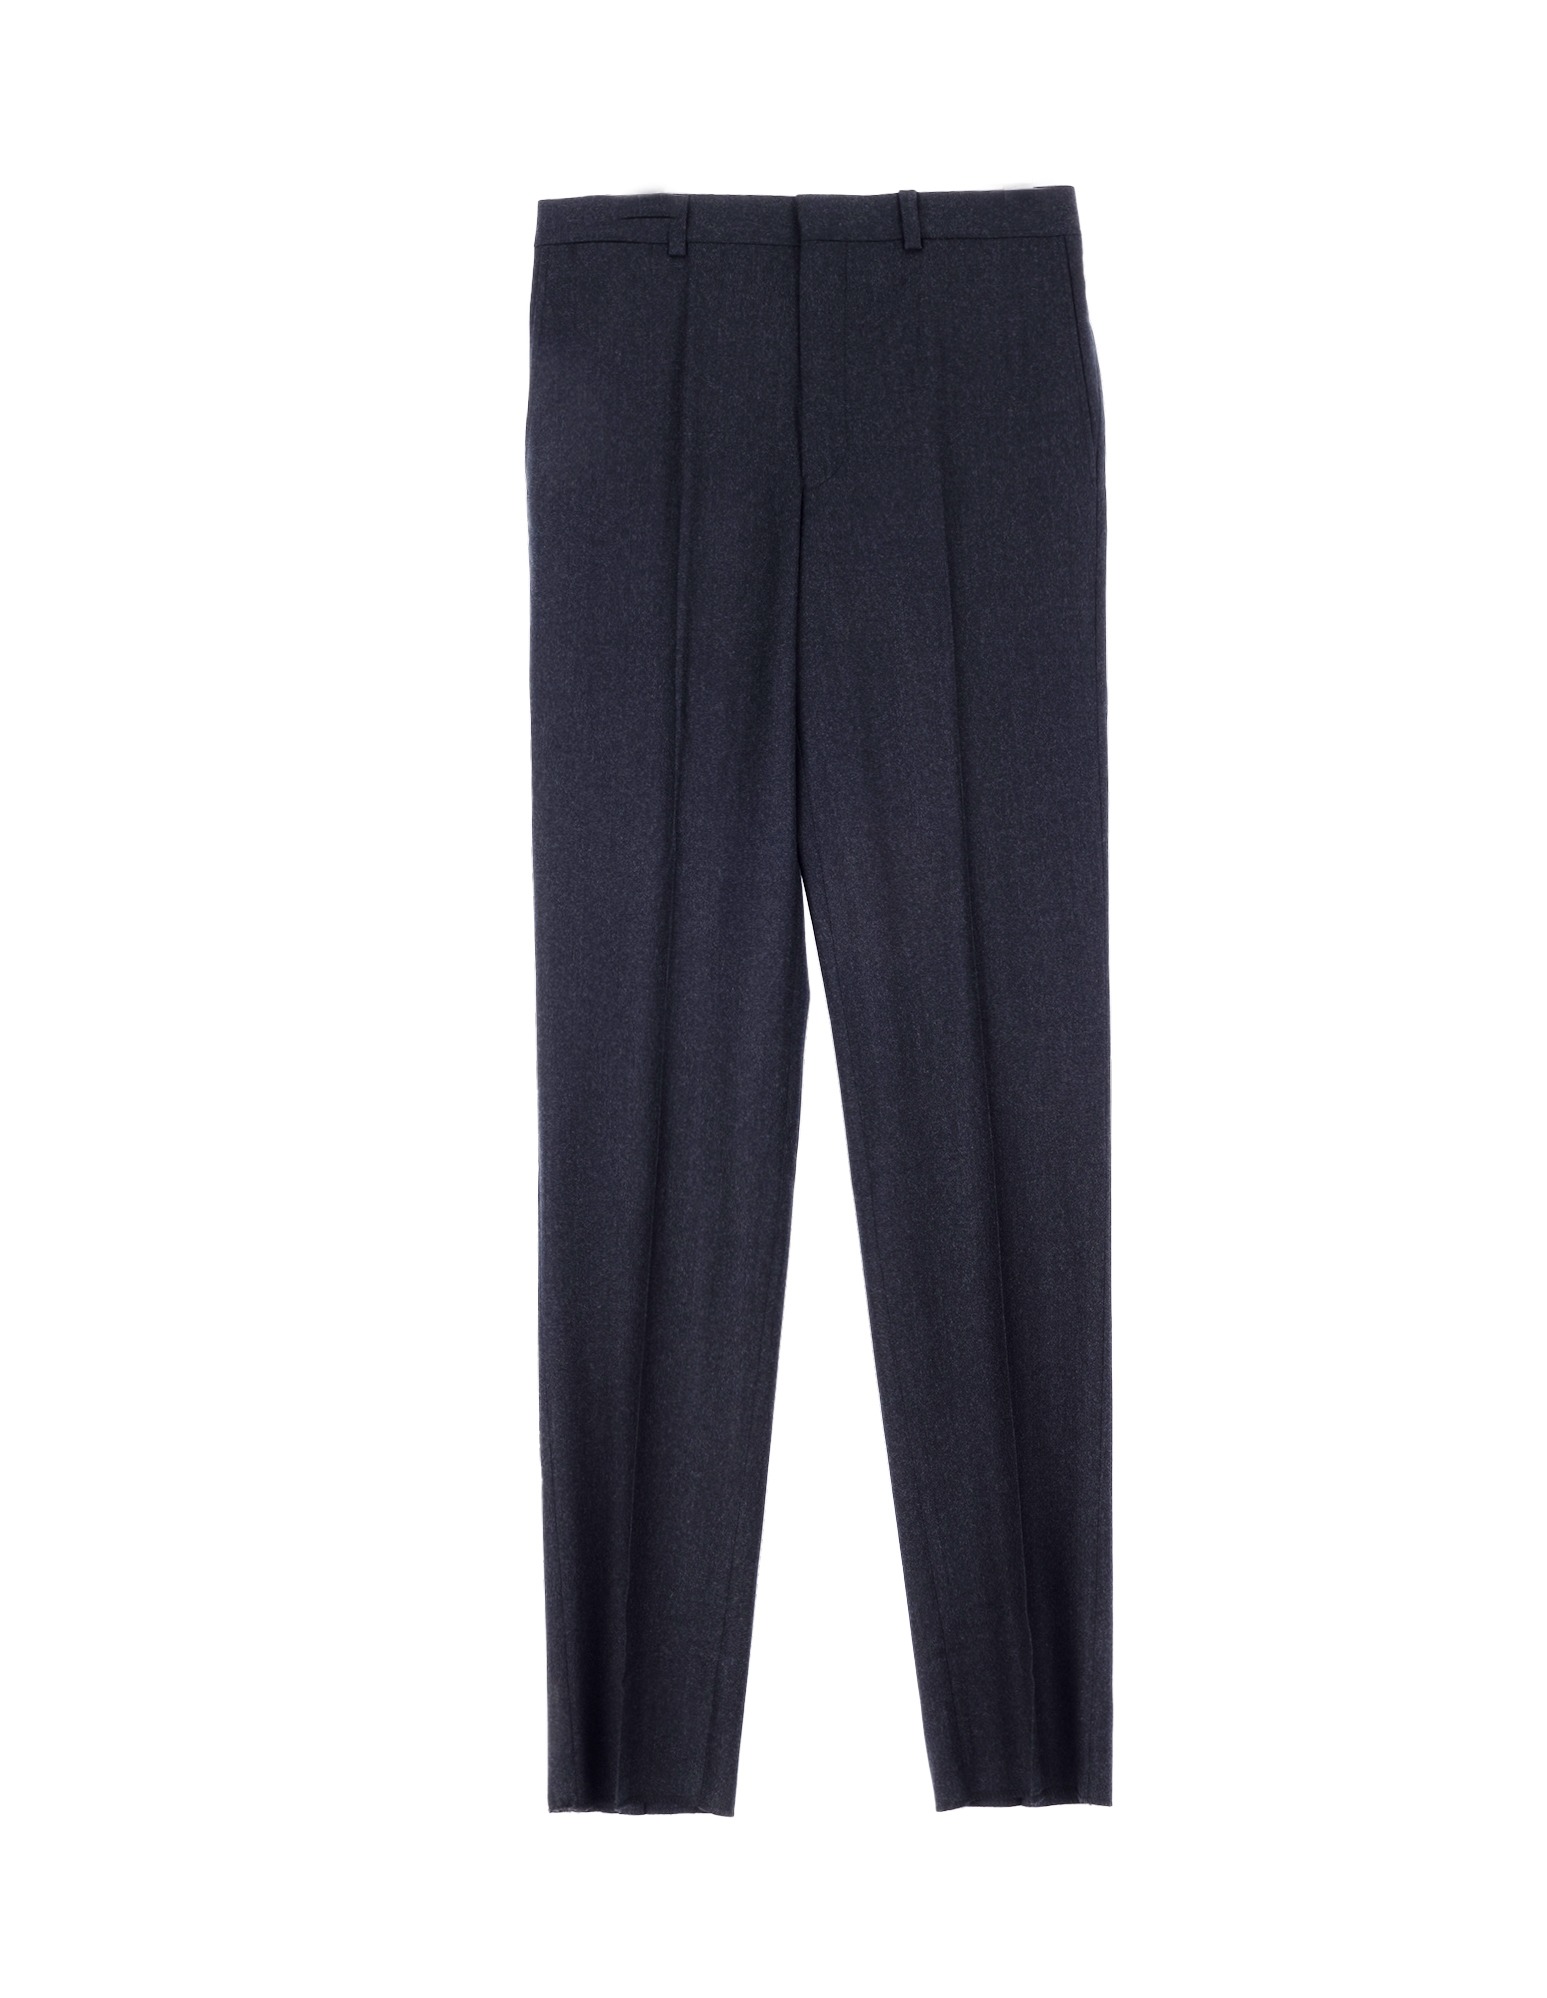 Wool Flannel Trousers (Charcoal)